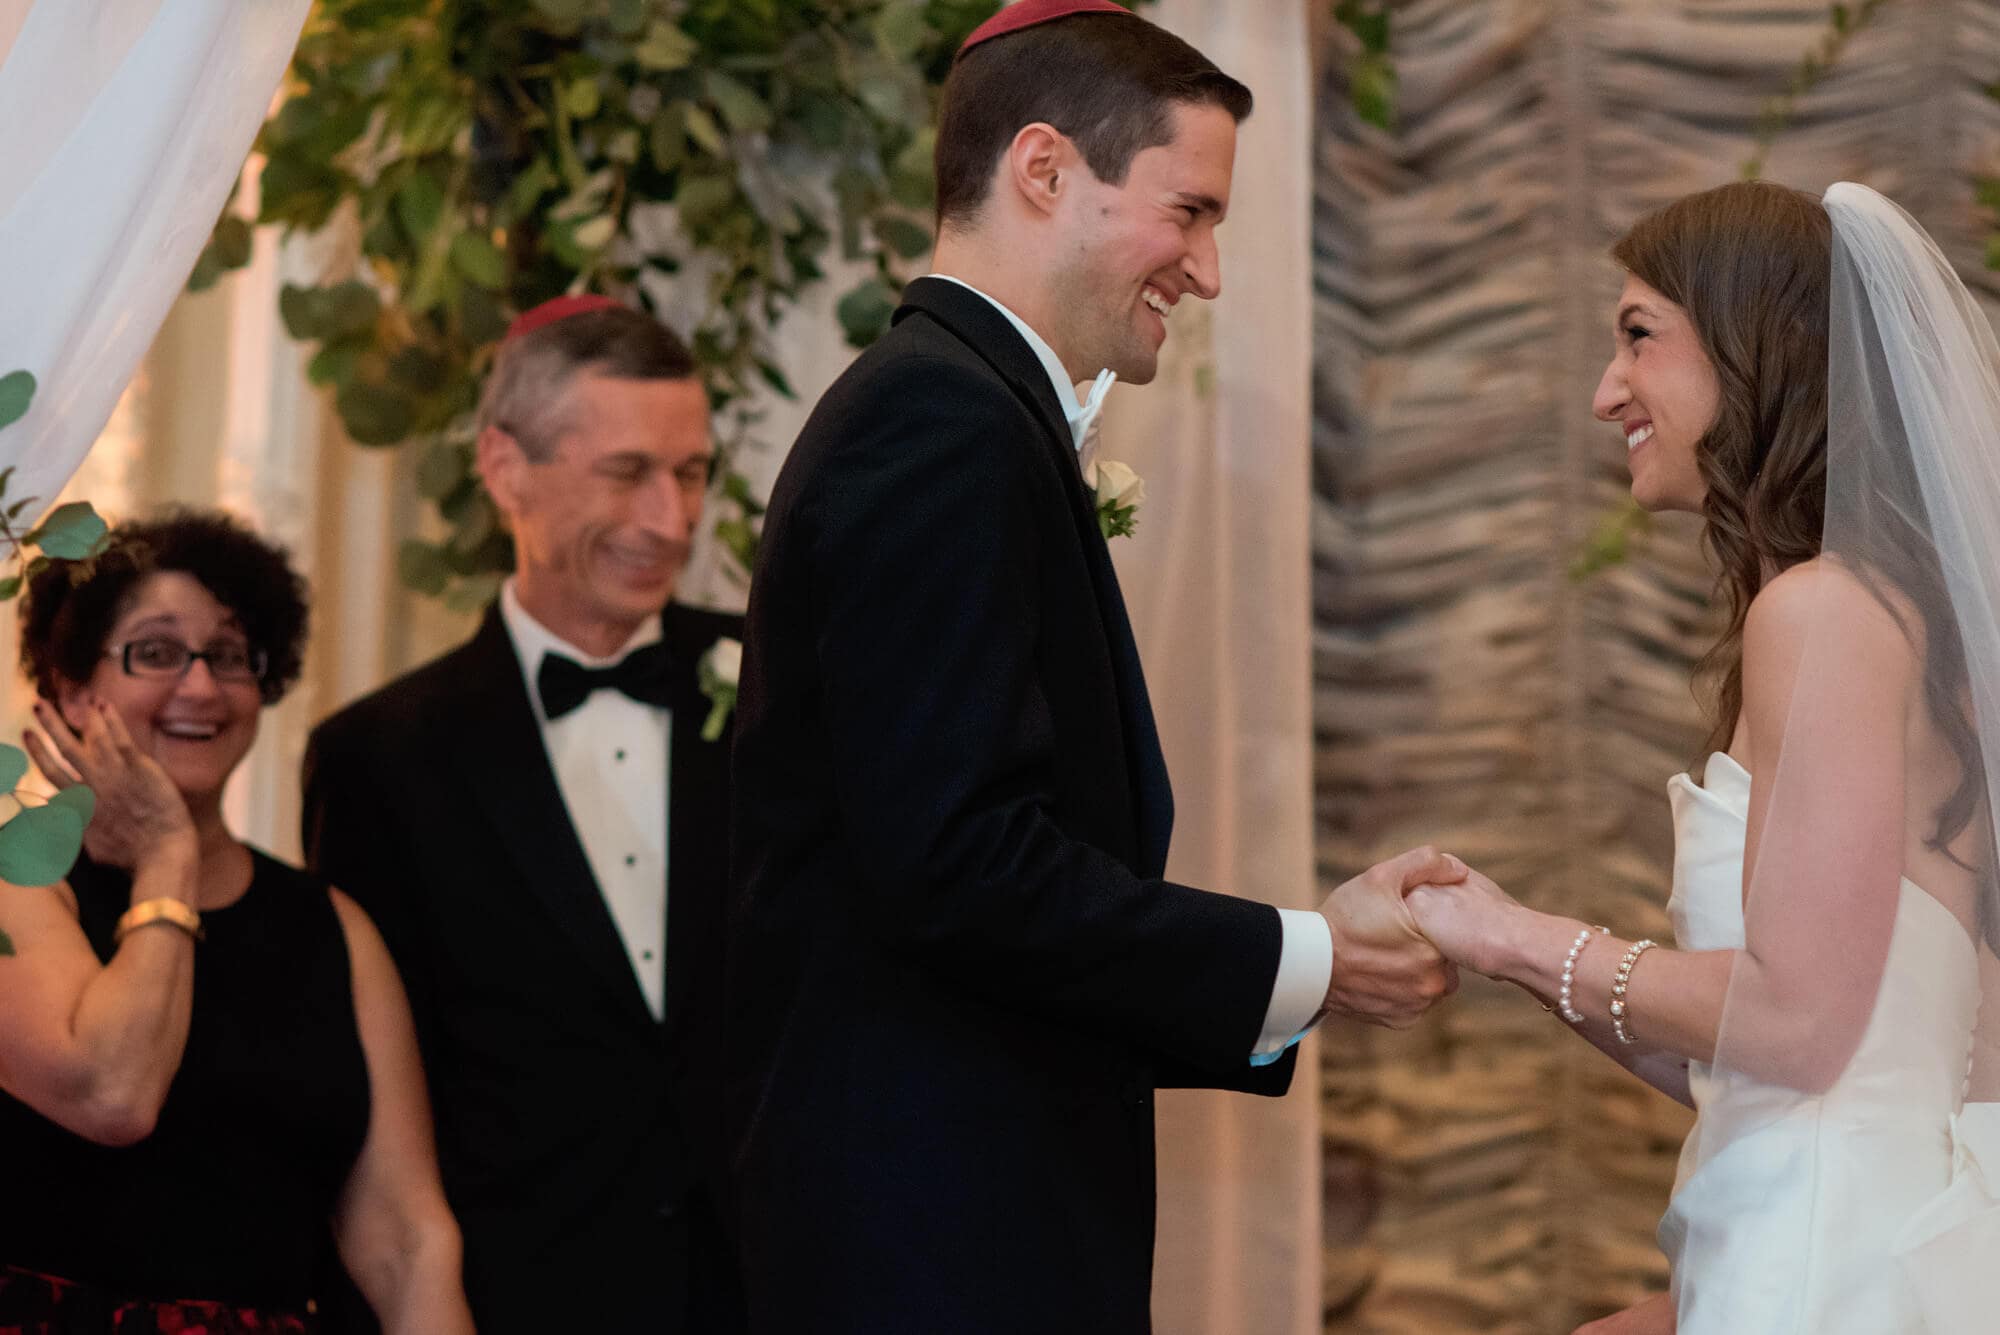 fun ring exchange moment at fairmont copley wedding